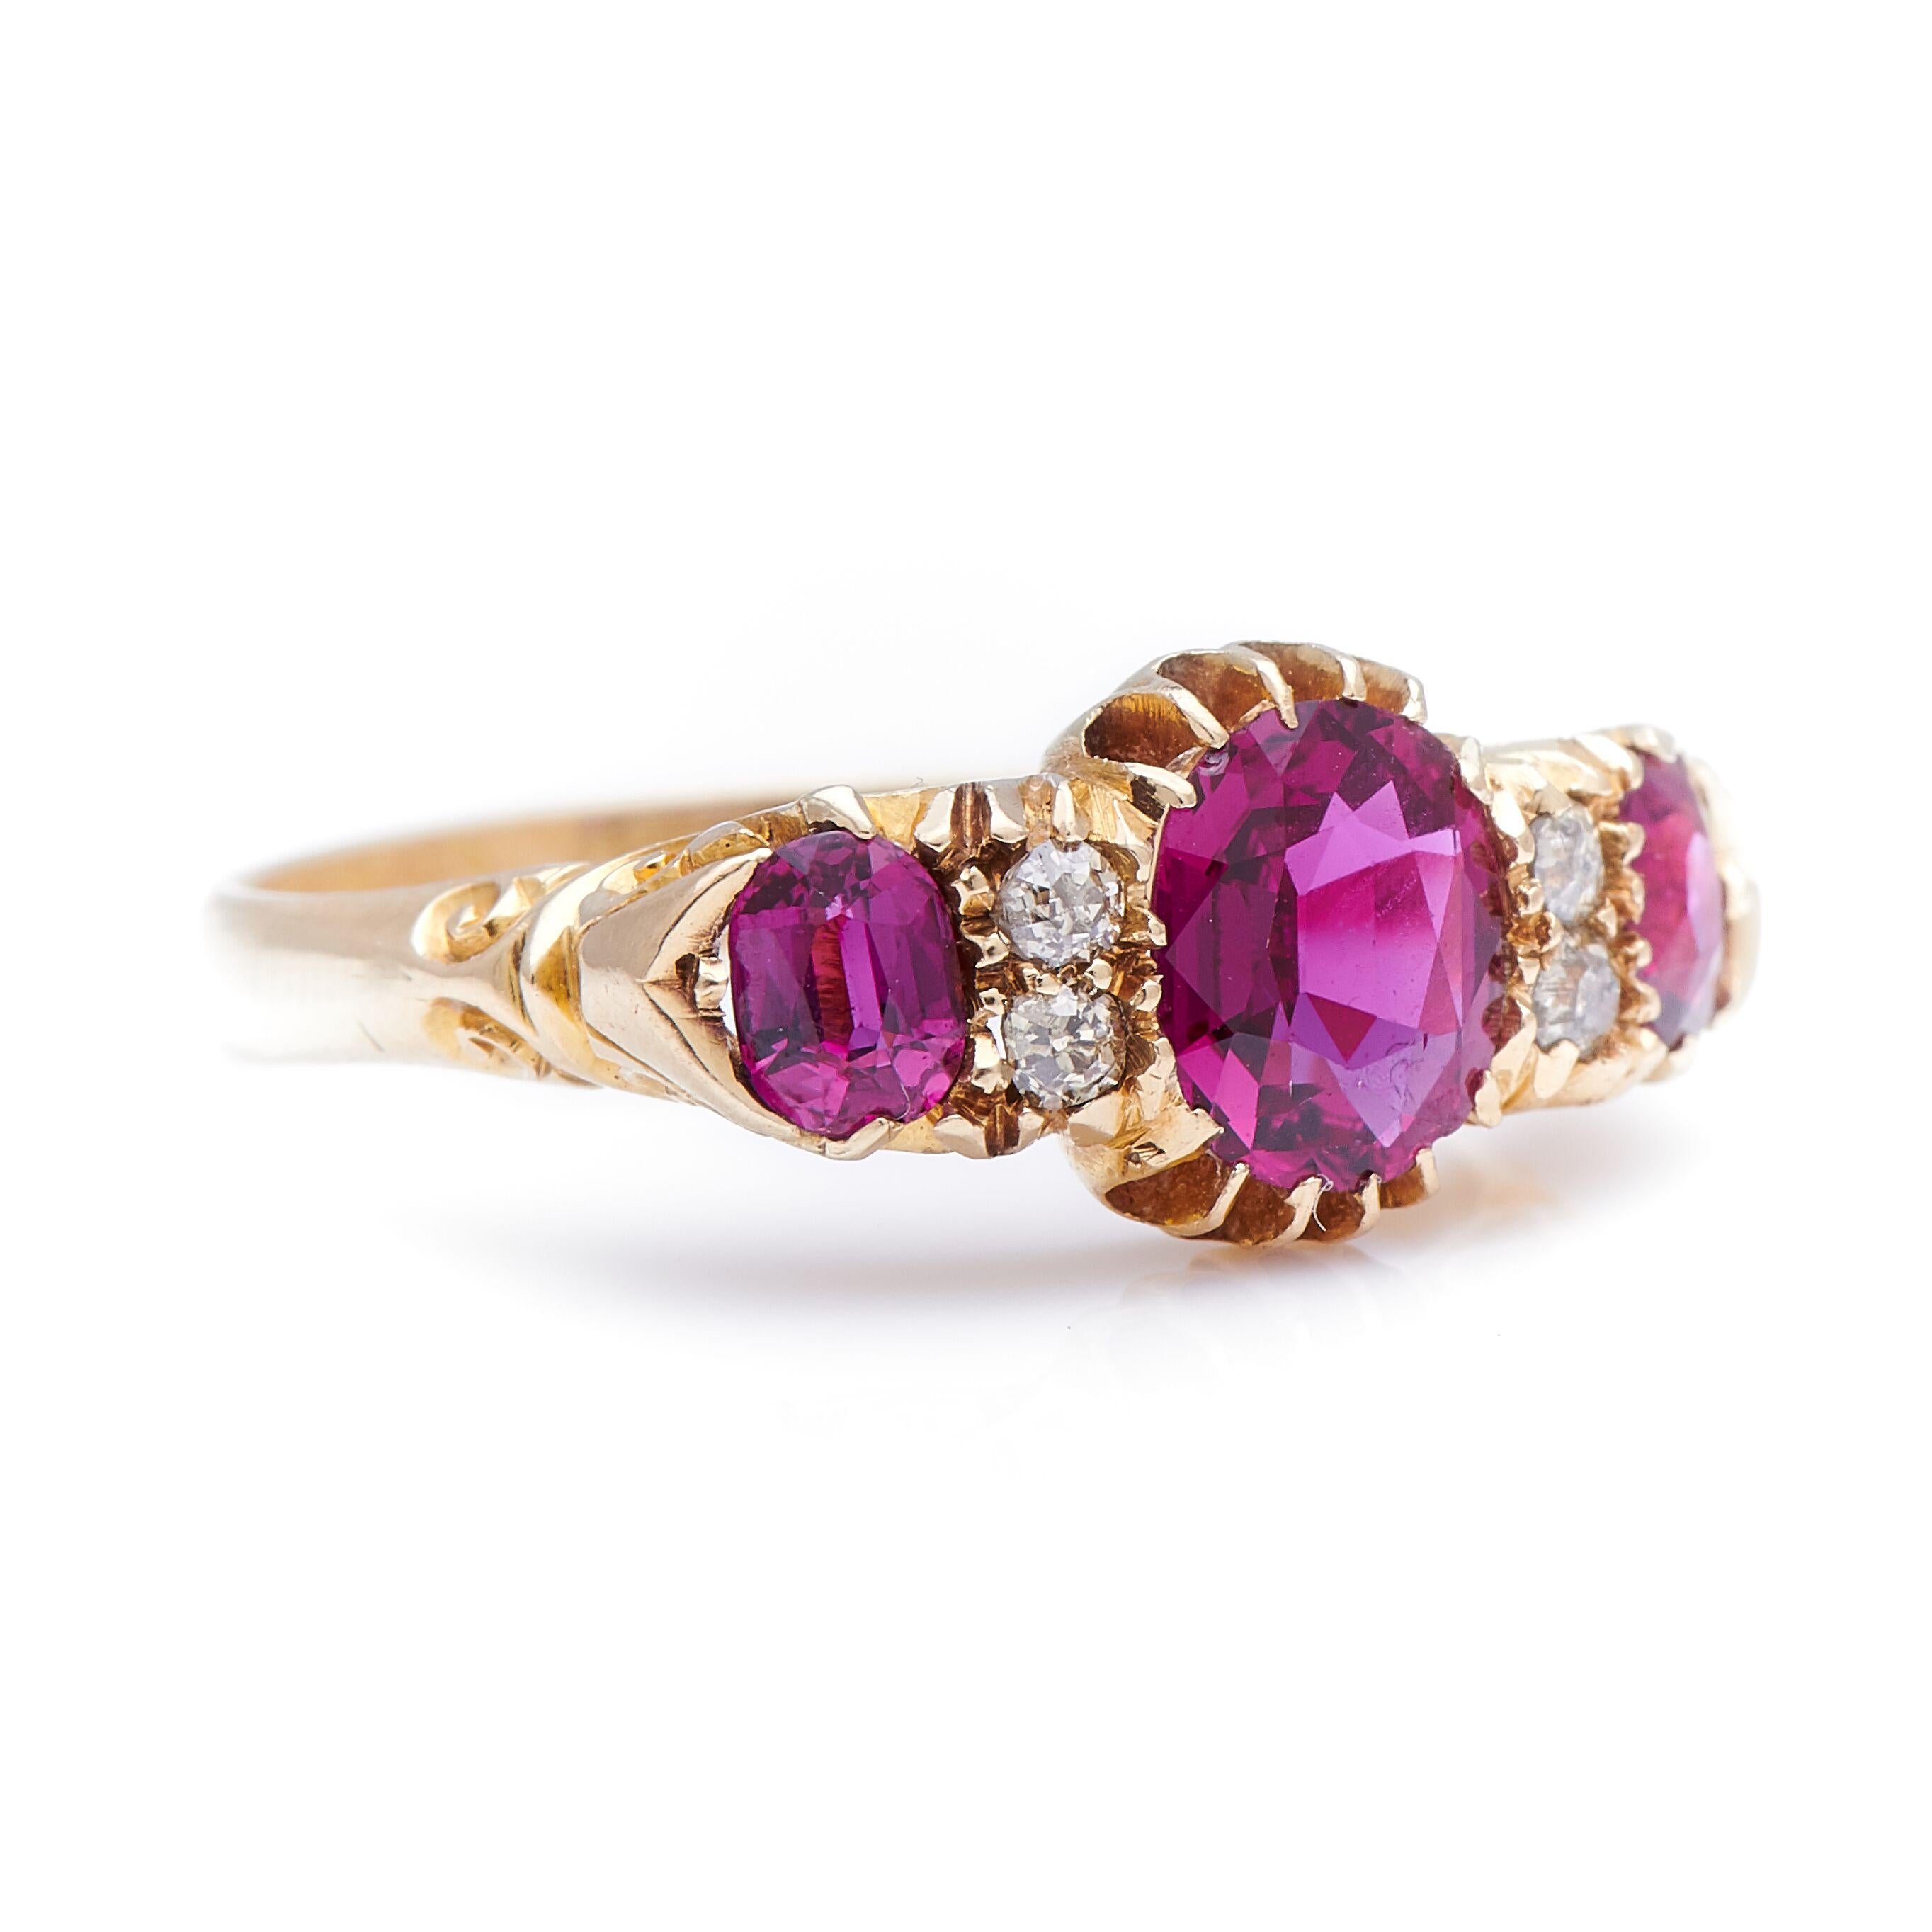 Ruby and diamond ring, 1899. This ring is set with a trio of natural, untreated rubies with a deep, purplish body colour and excellent clarity, to a rich, buttery yellow gold mount enhanced with hand carved scrolled motifs and four single-cut